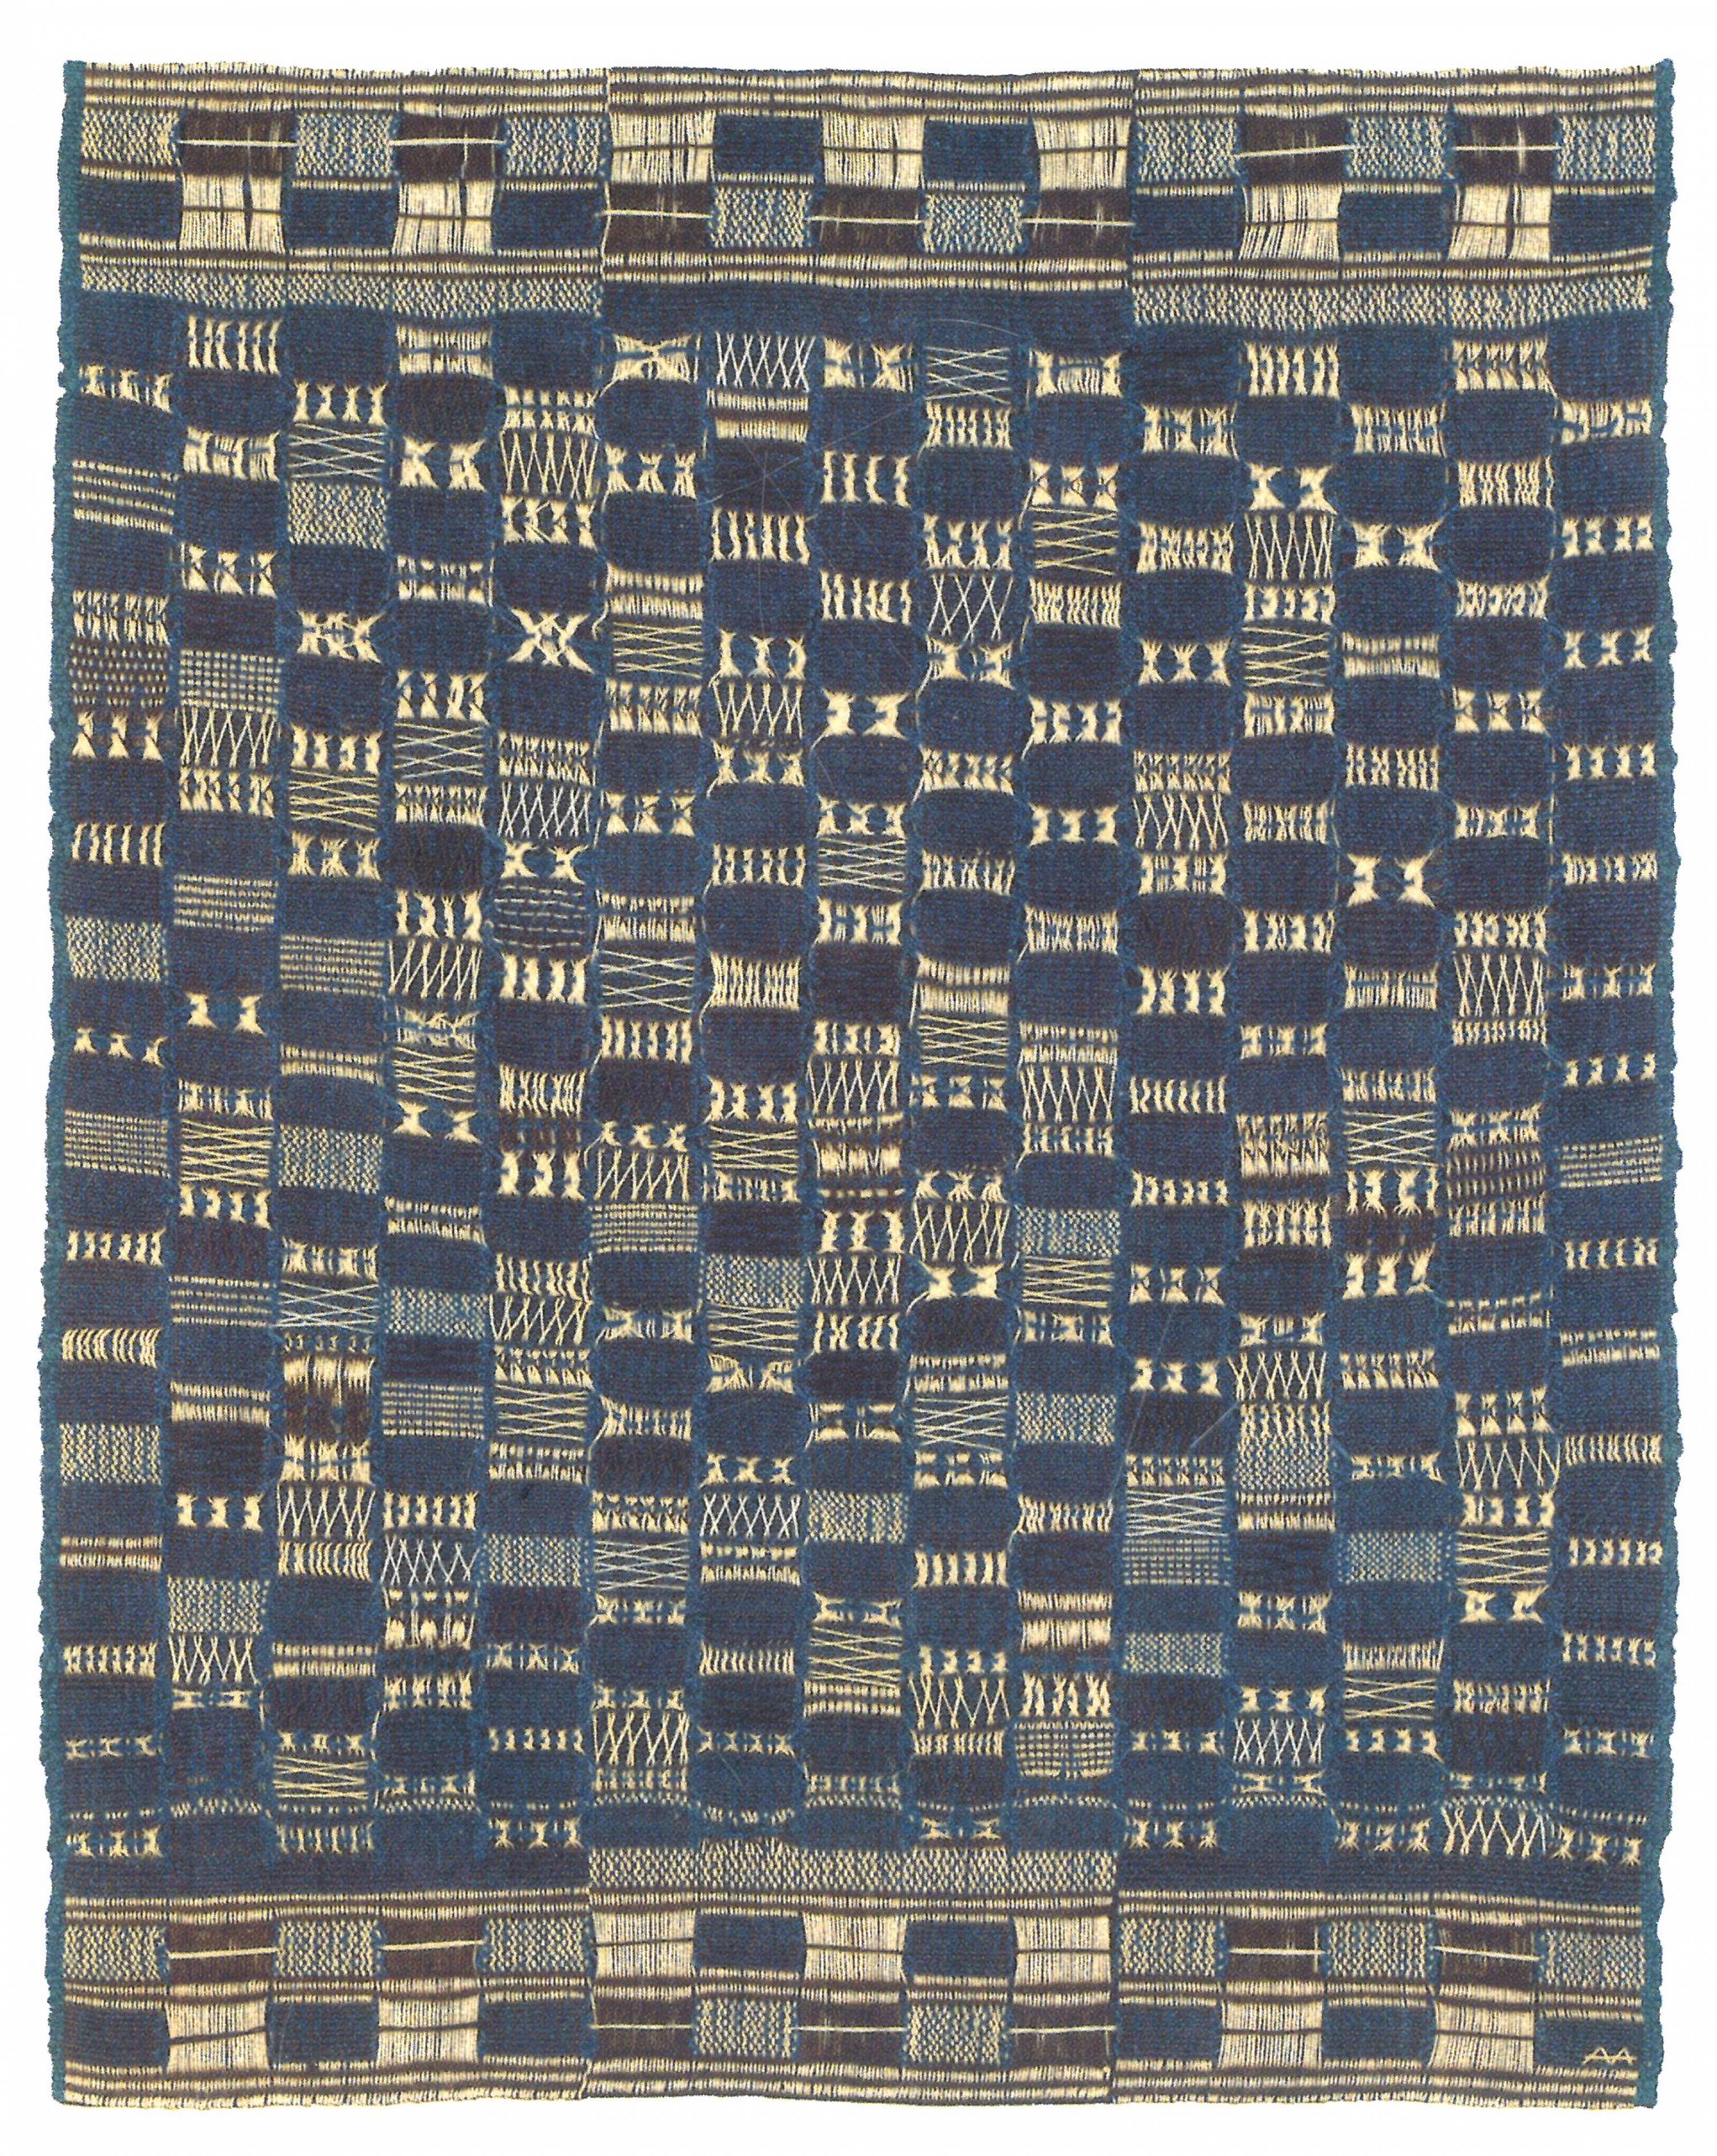 Anni Albers, Thickly settled, 1957, ©Yale university art gallery, New Haven